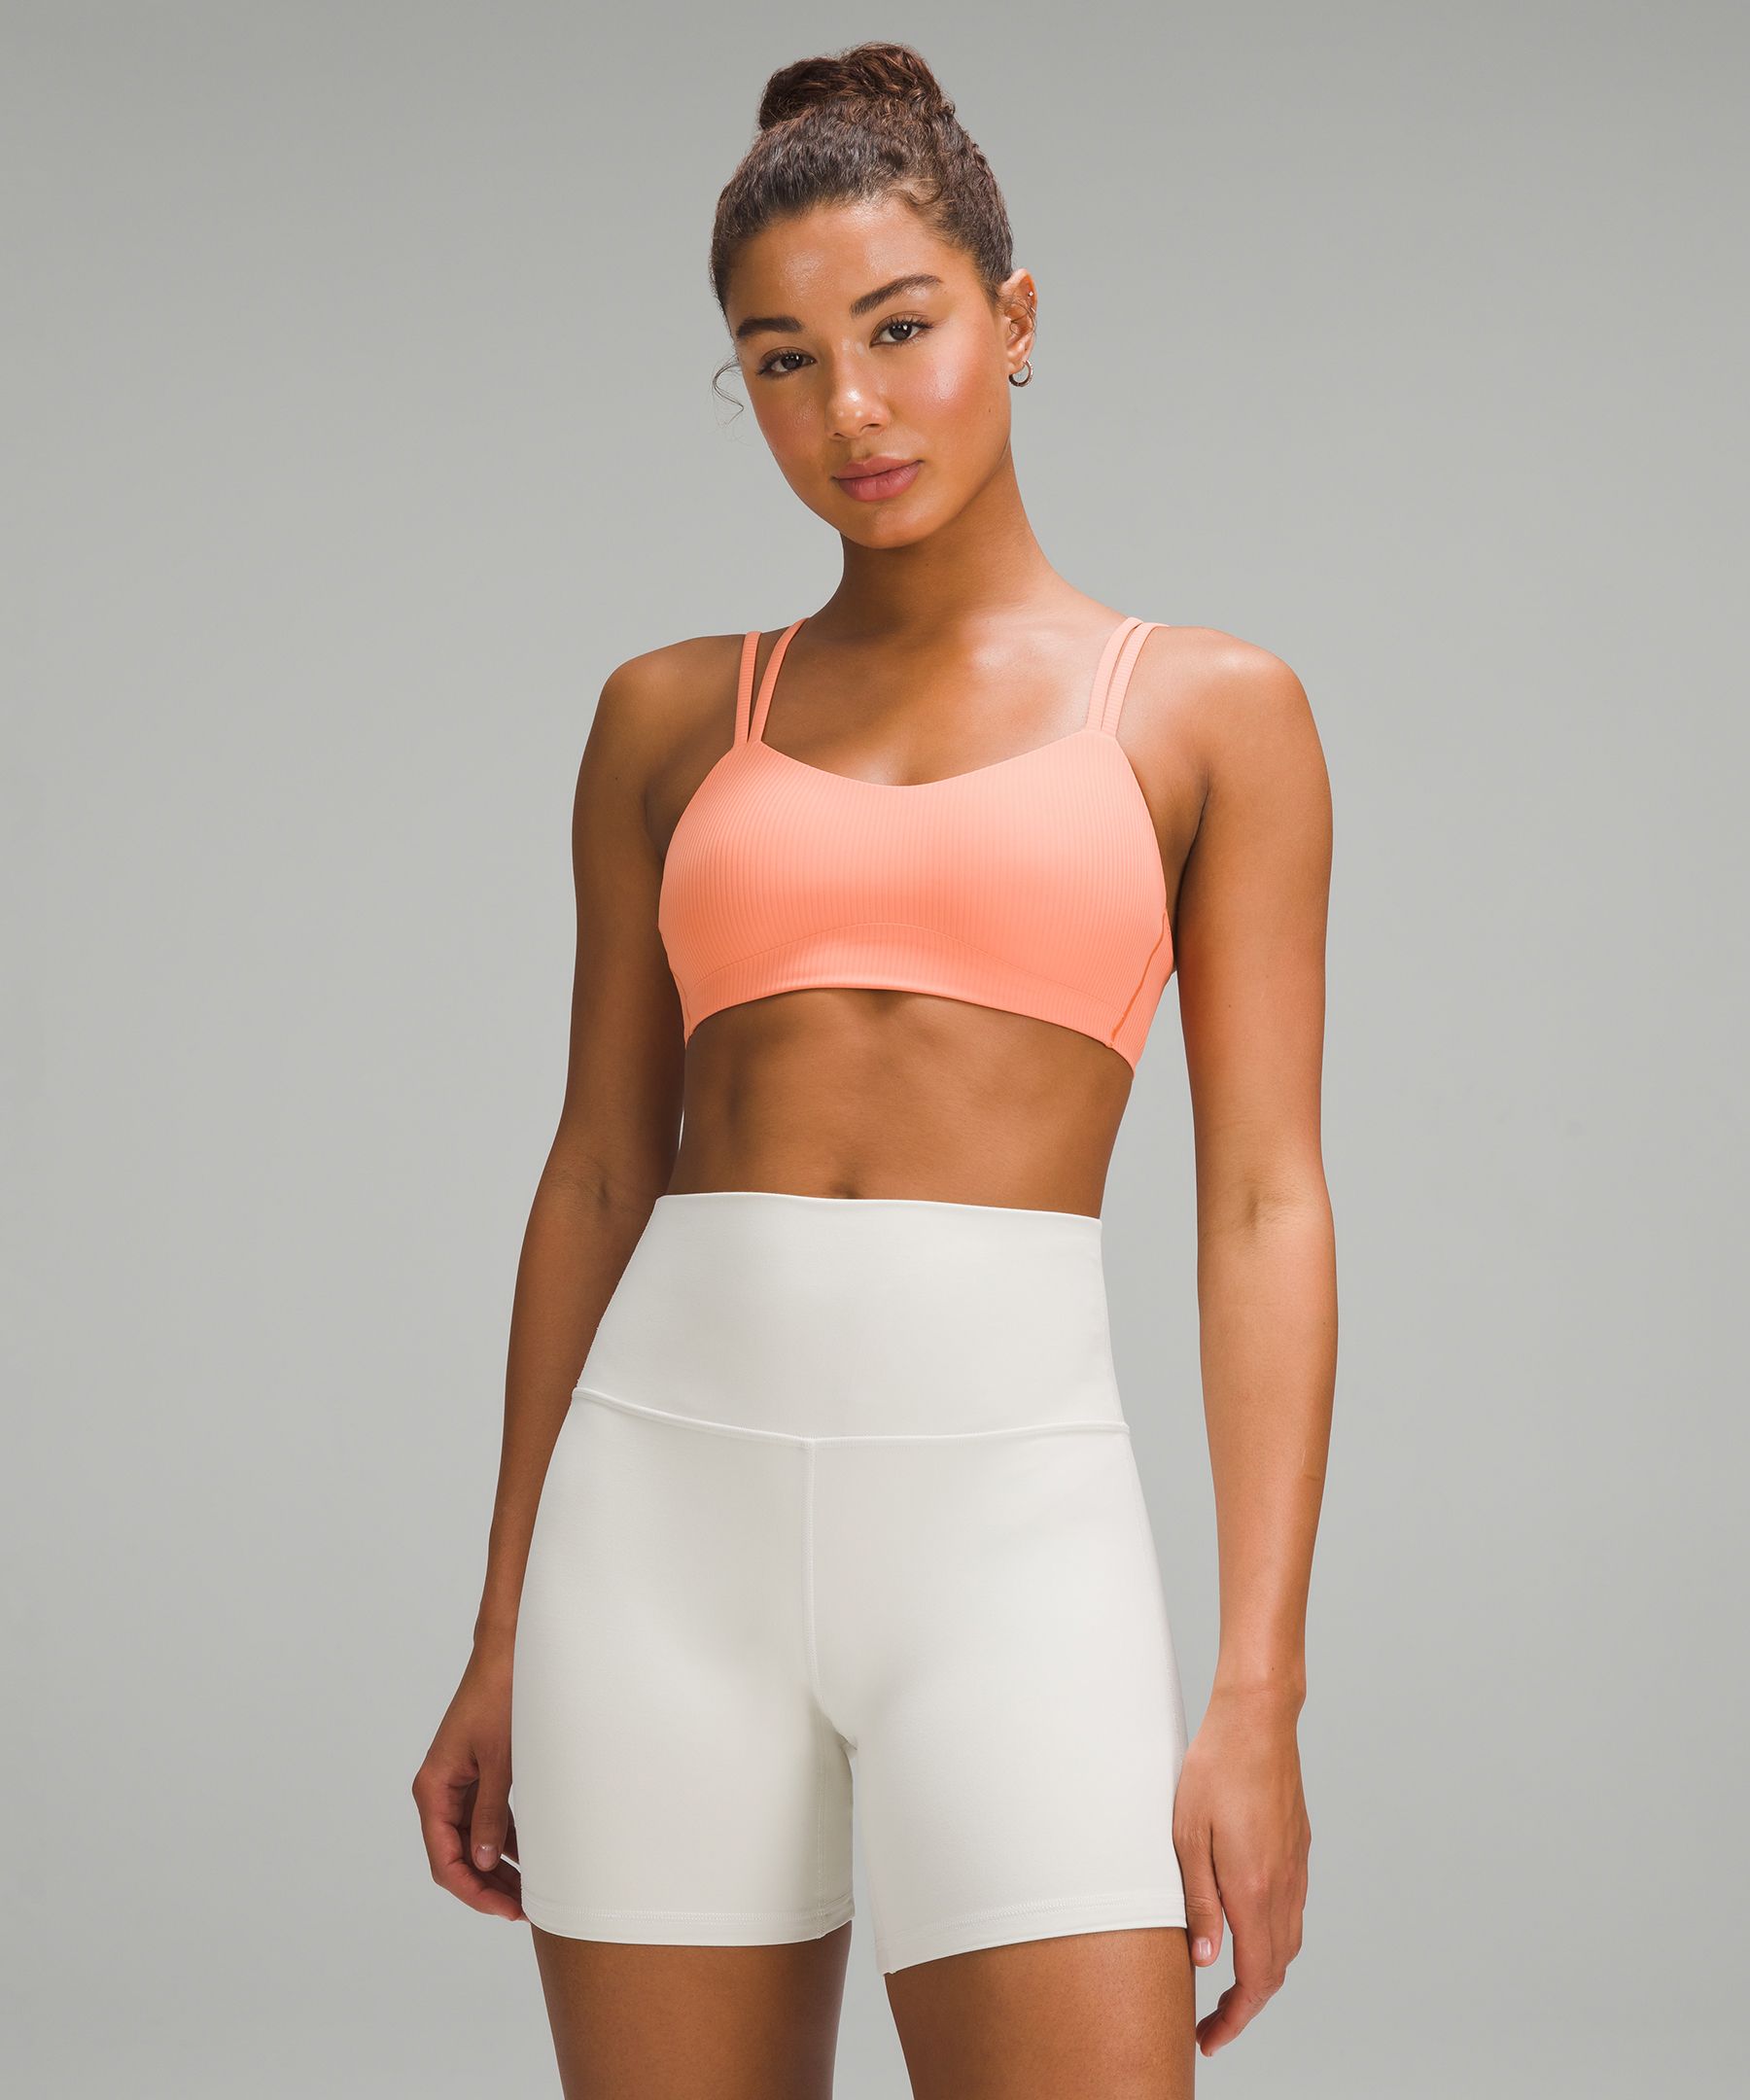 Lululemon Like a Cloud Sports Bra Look for Less from Aerie